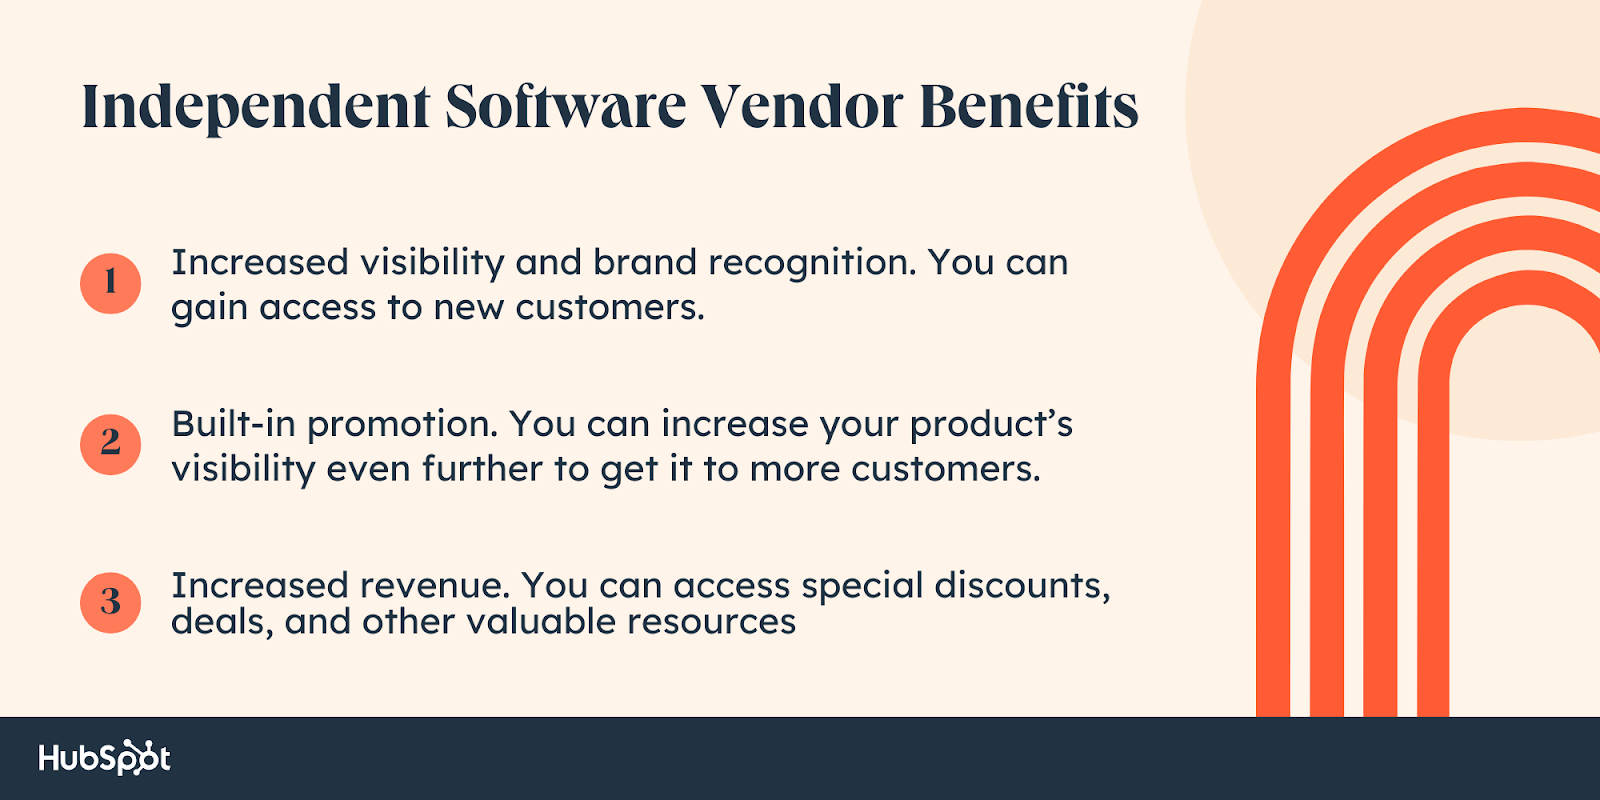 Independent Software Vendor Benefits. Increased visibility and brand recognition. You can gain access to new customers. Built-in promotion. You can increase your product’s visibility even further to get it to more customers. Increased revenue. You can access special discounts, deals, and other valuable resources.